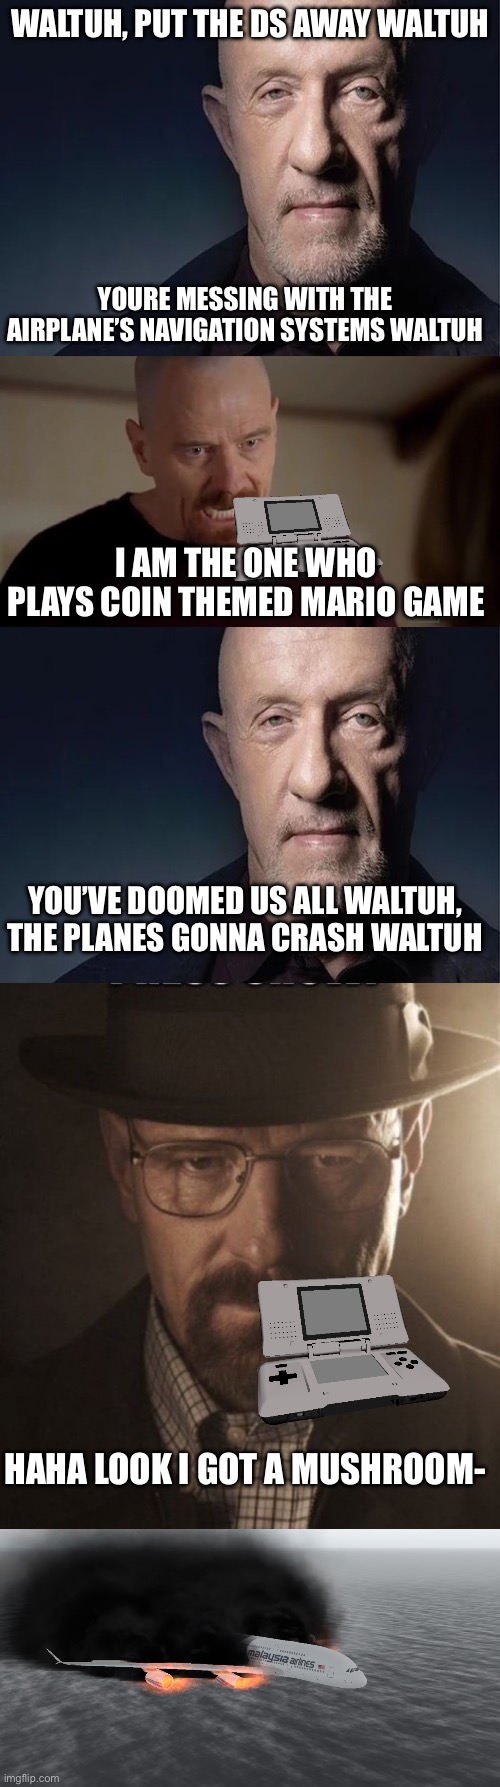 put the ds away waltuh | WALTUH, PUT THE DS AWAY WALTUH; YOURE MESSING WITH THE AIRPLANE’S NAVIGATION SYSTEMS WALTUH; I AM THE ONE WHO PLAYS COIN THEMED MARIO GAME; YOU’VE DOOMED US ALL WALTUH, THE PLANES GONNA CRASH WALTUH; HAHA LOOK I GOT A MUSHROOM- | image tagged in waltuh,i am the one who knocks,crashed airplane | made w/ Imgflip meme maker